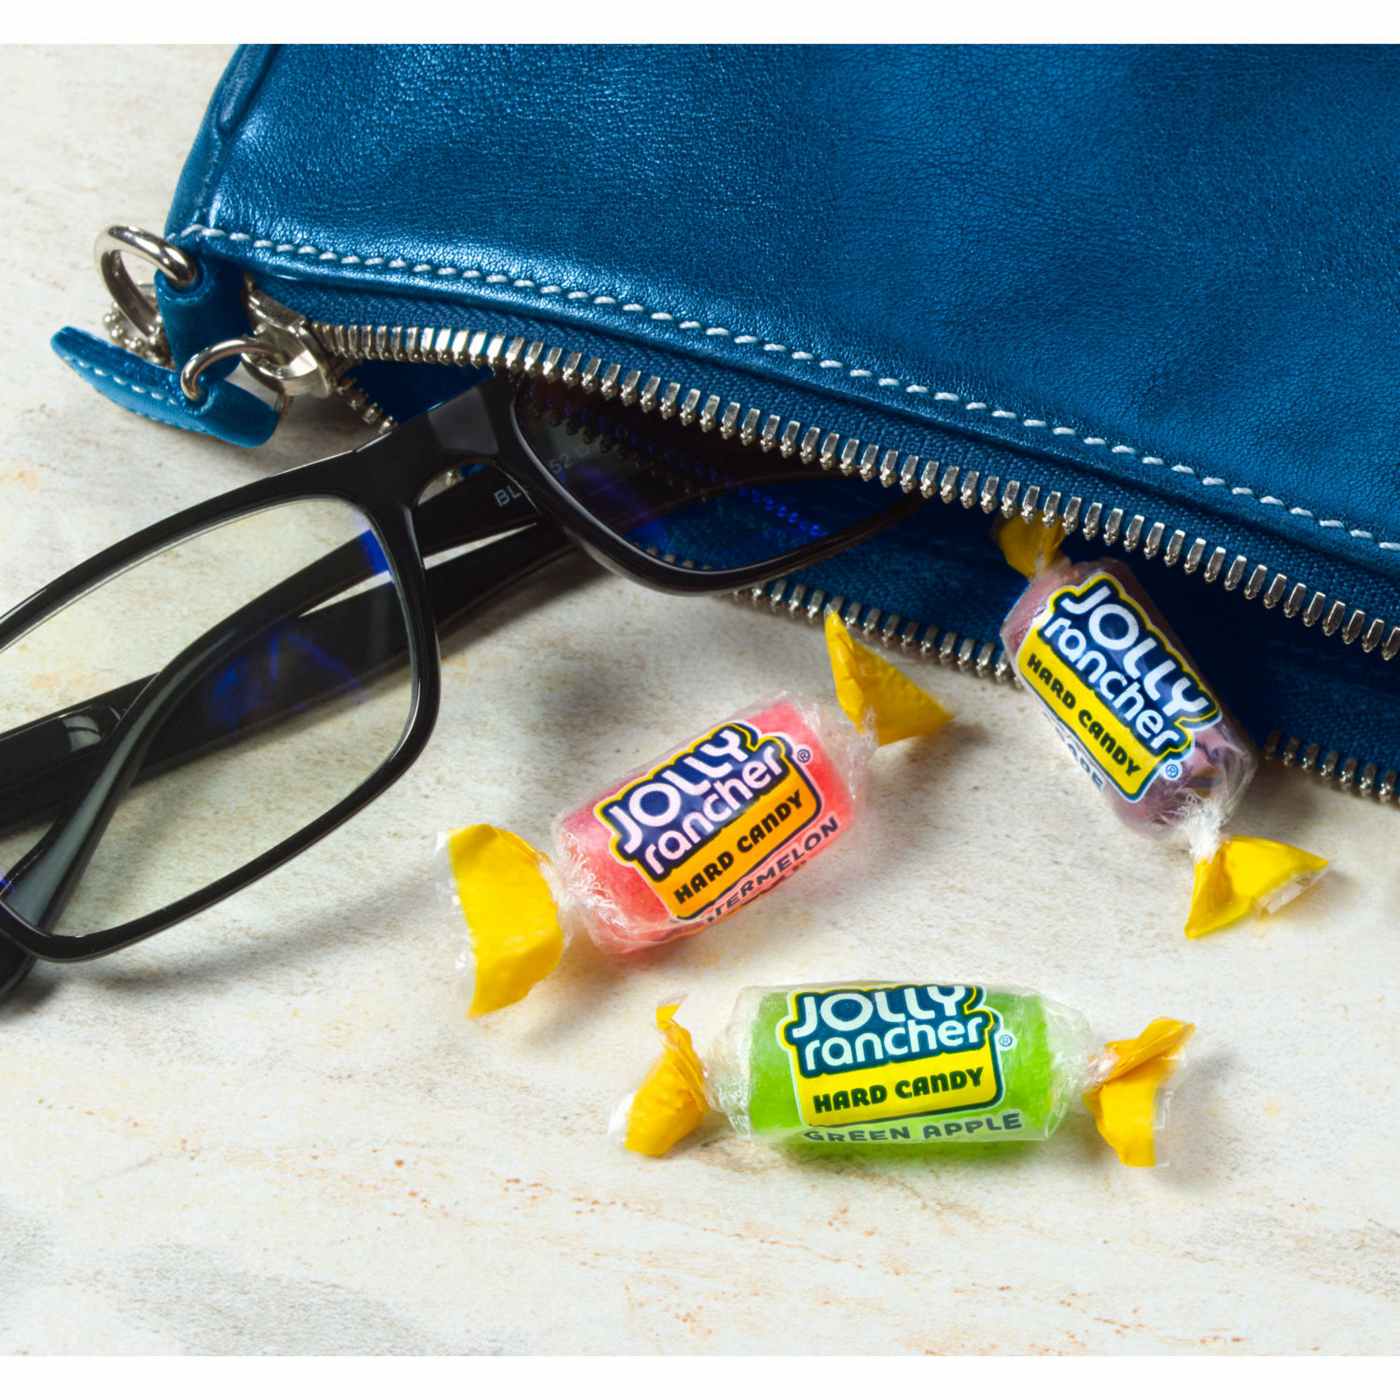 Jolly Rancher Original Fruit Flavored Hard Candy; image 3 of 4